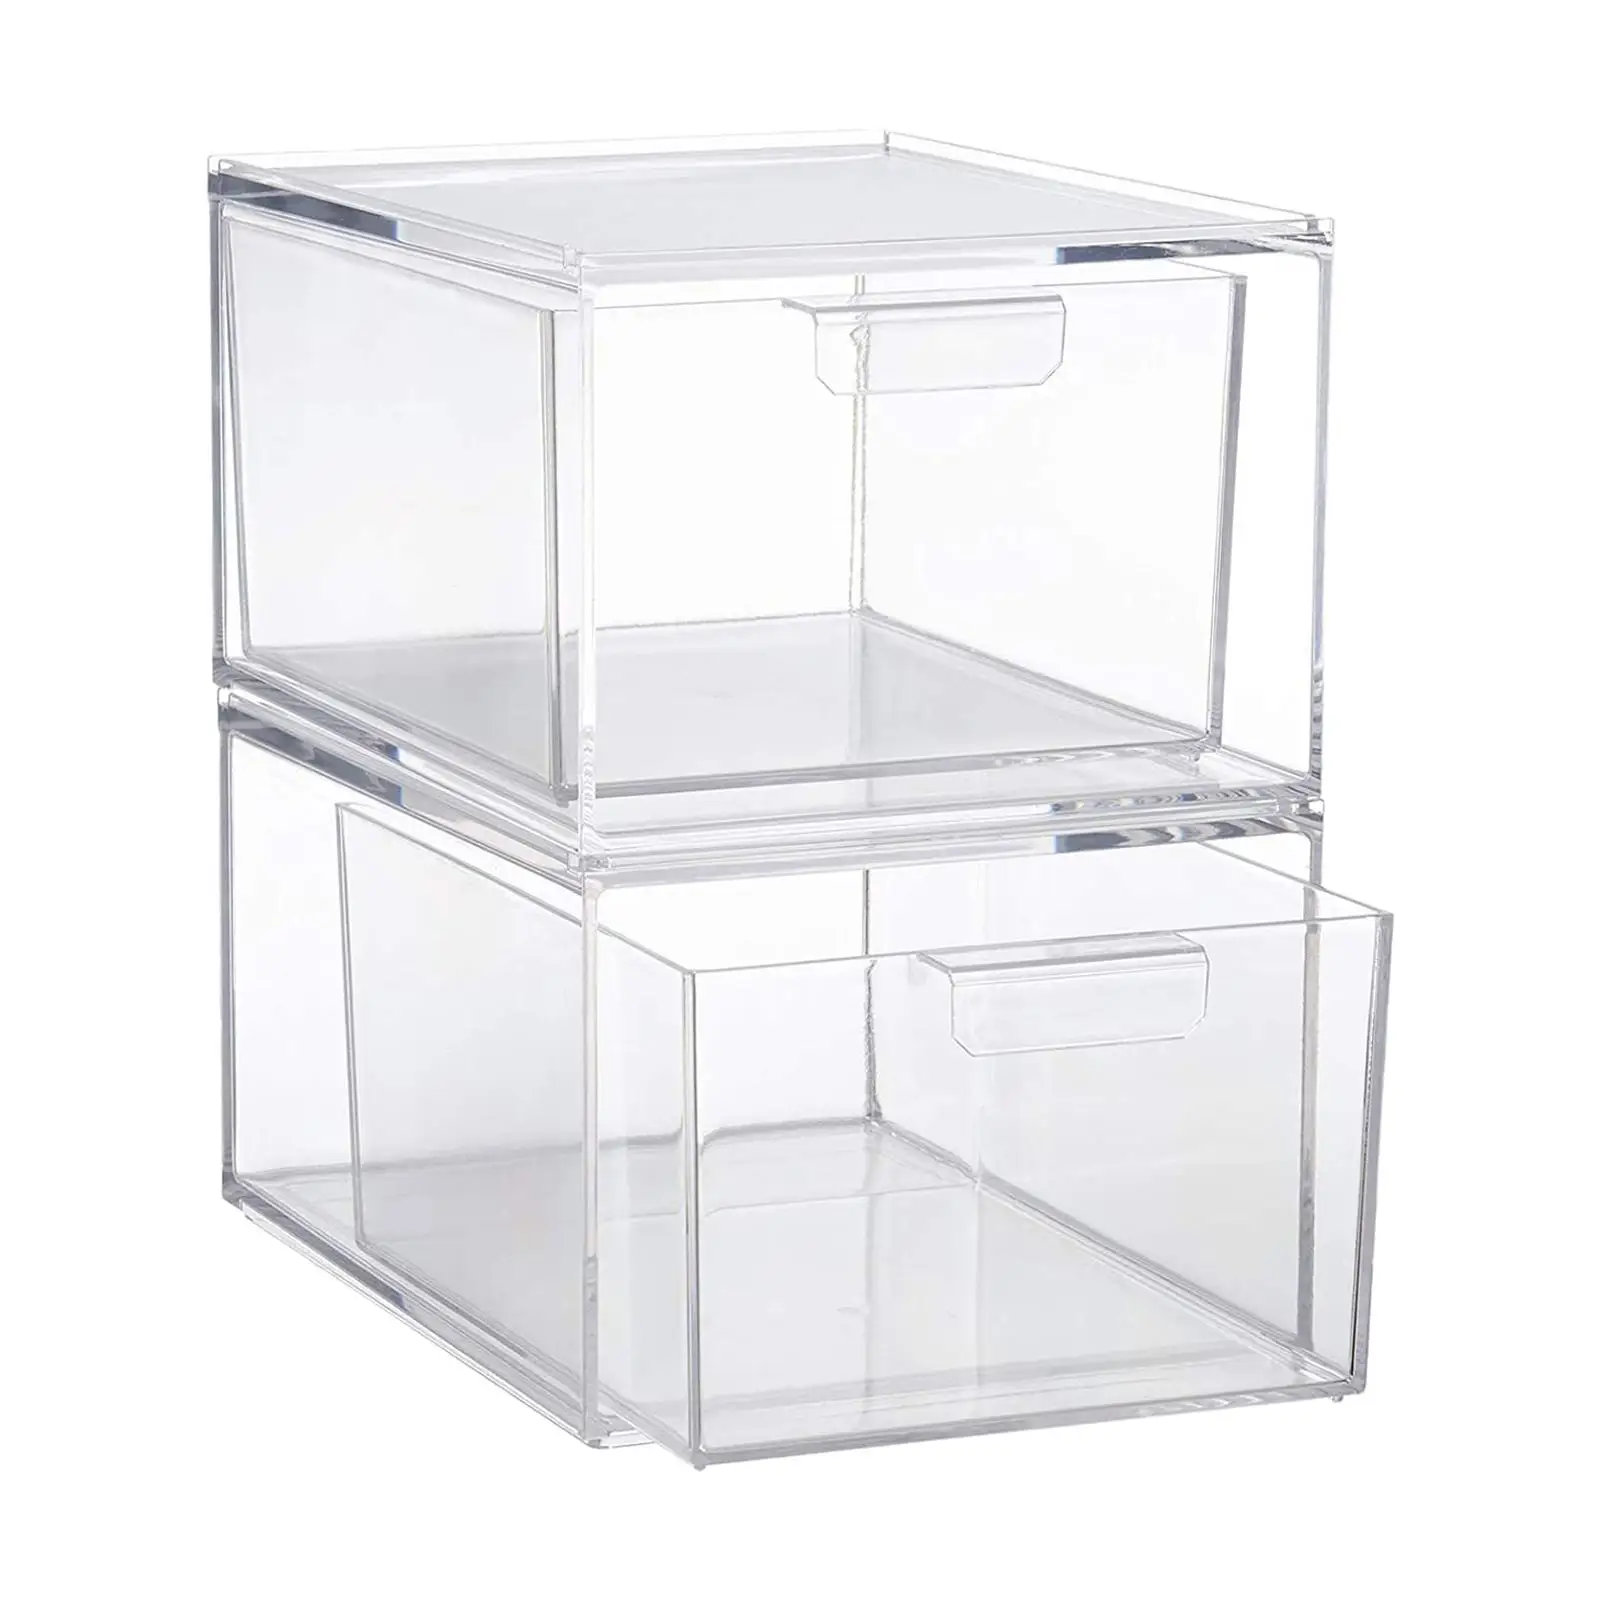 2 Pieces Acrylic Storage Container Home Organization Tabletop Clear Storage Box for Lipsticks Cosmetics Hair Brushes Jewelry